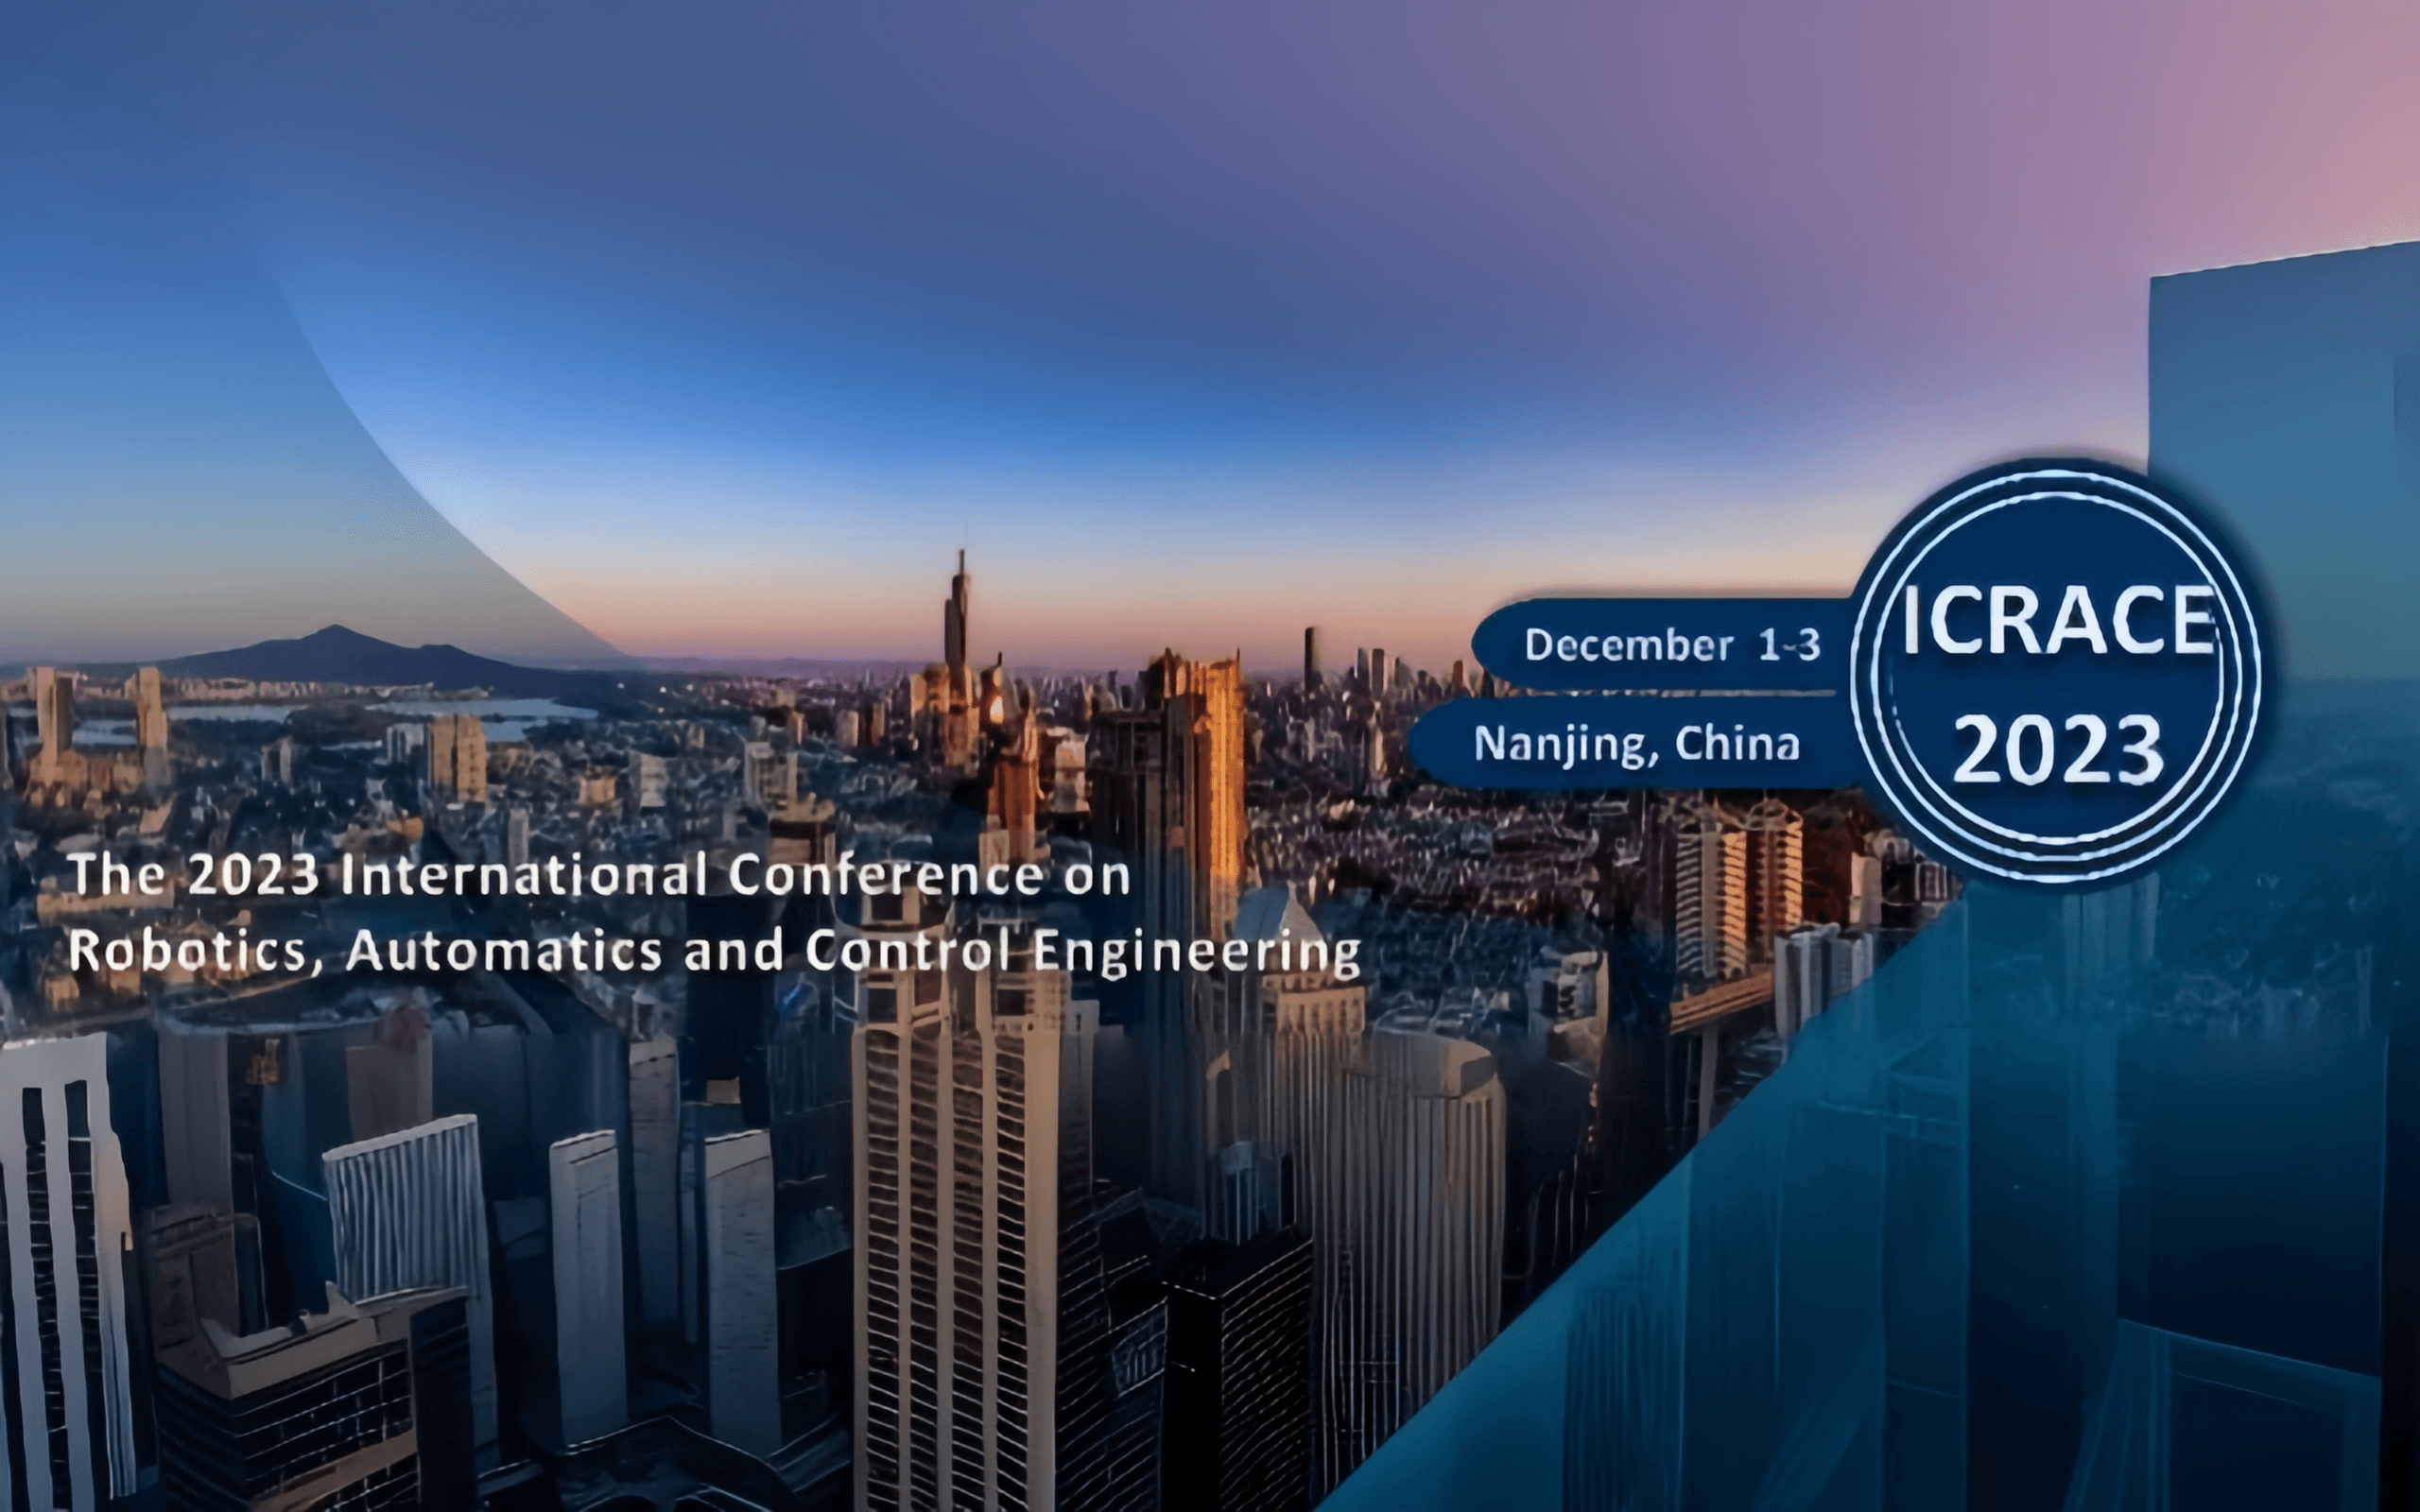  The 2023 International Conference on Robotics, Automatics and Control Engineering（ICRACE2023）